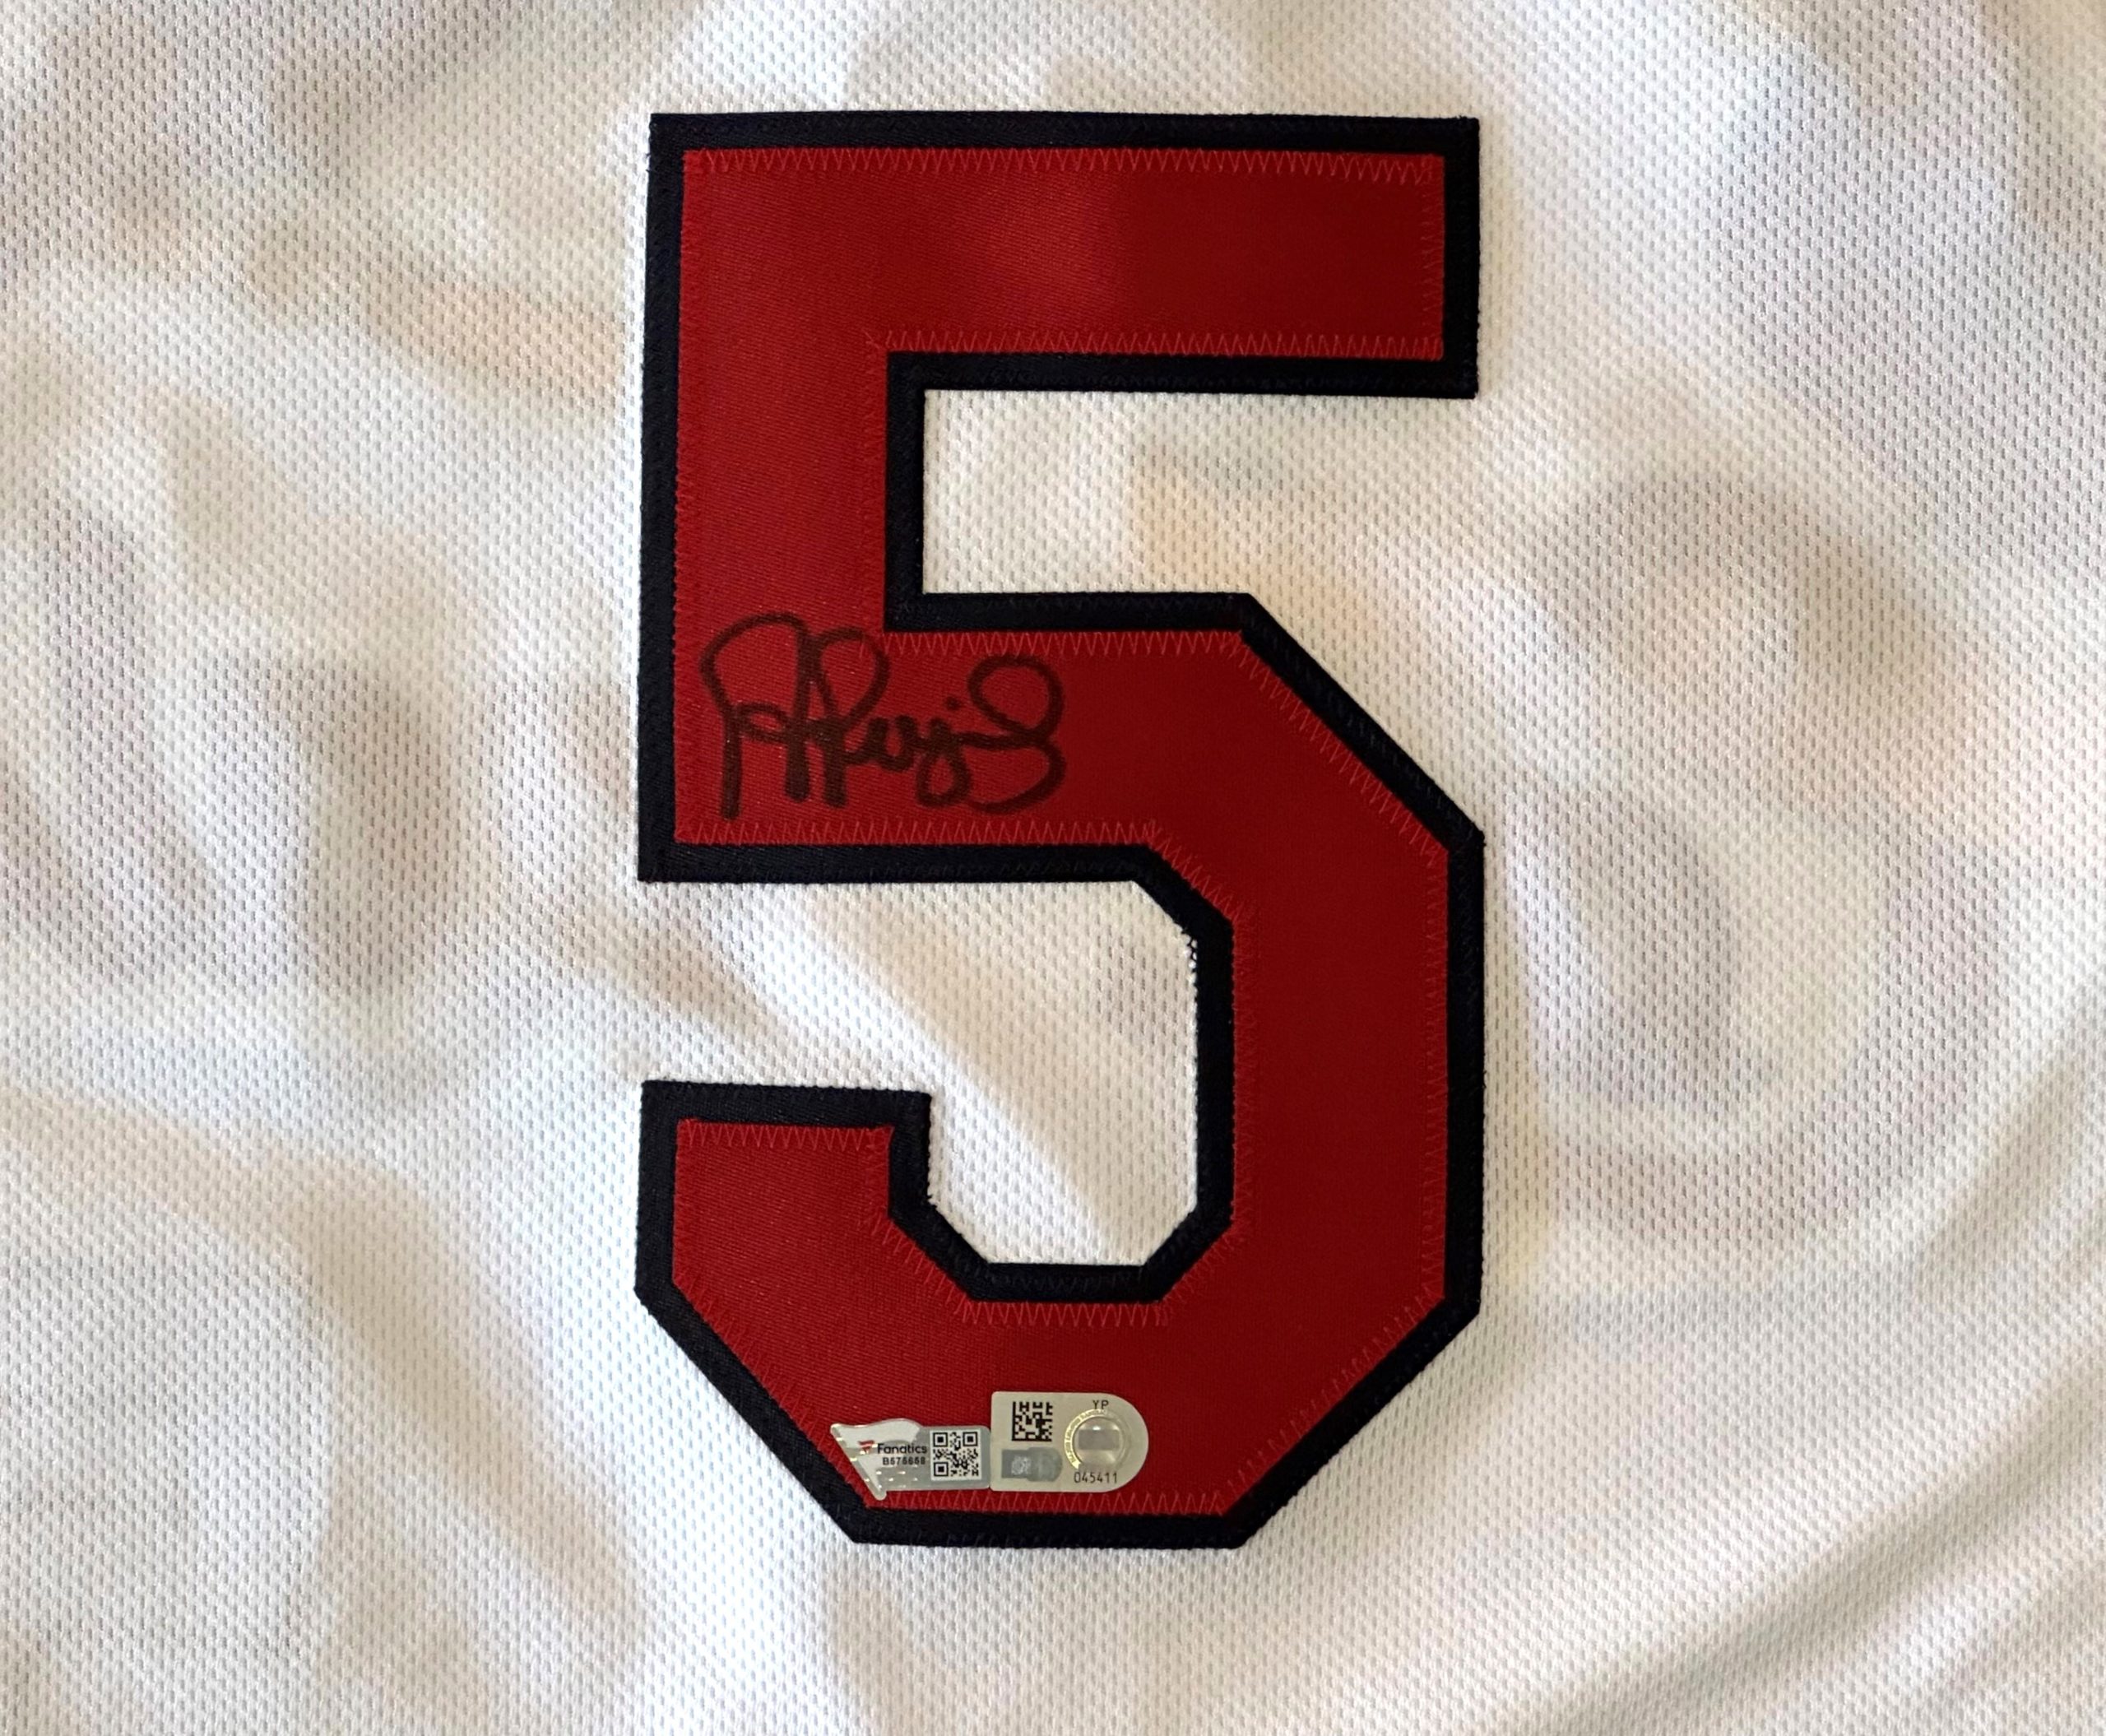 pujols signed jersey